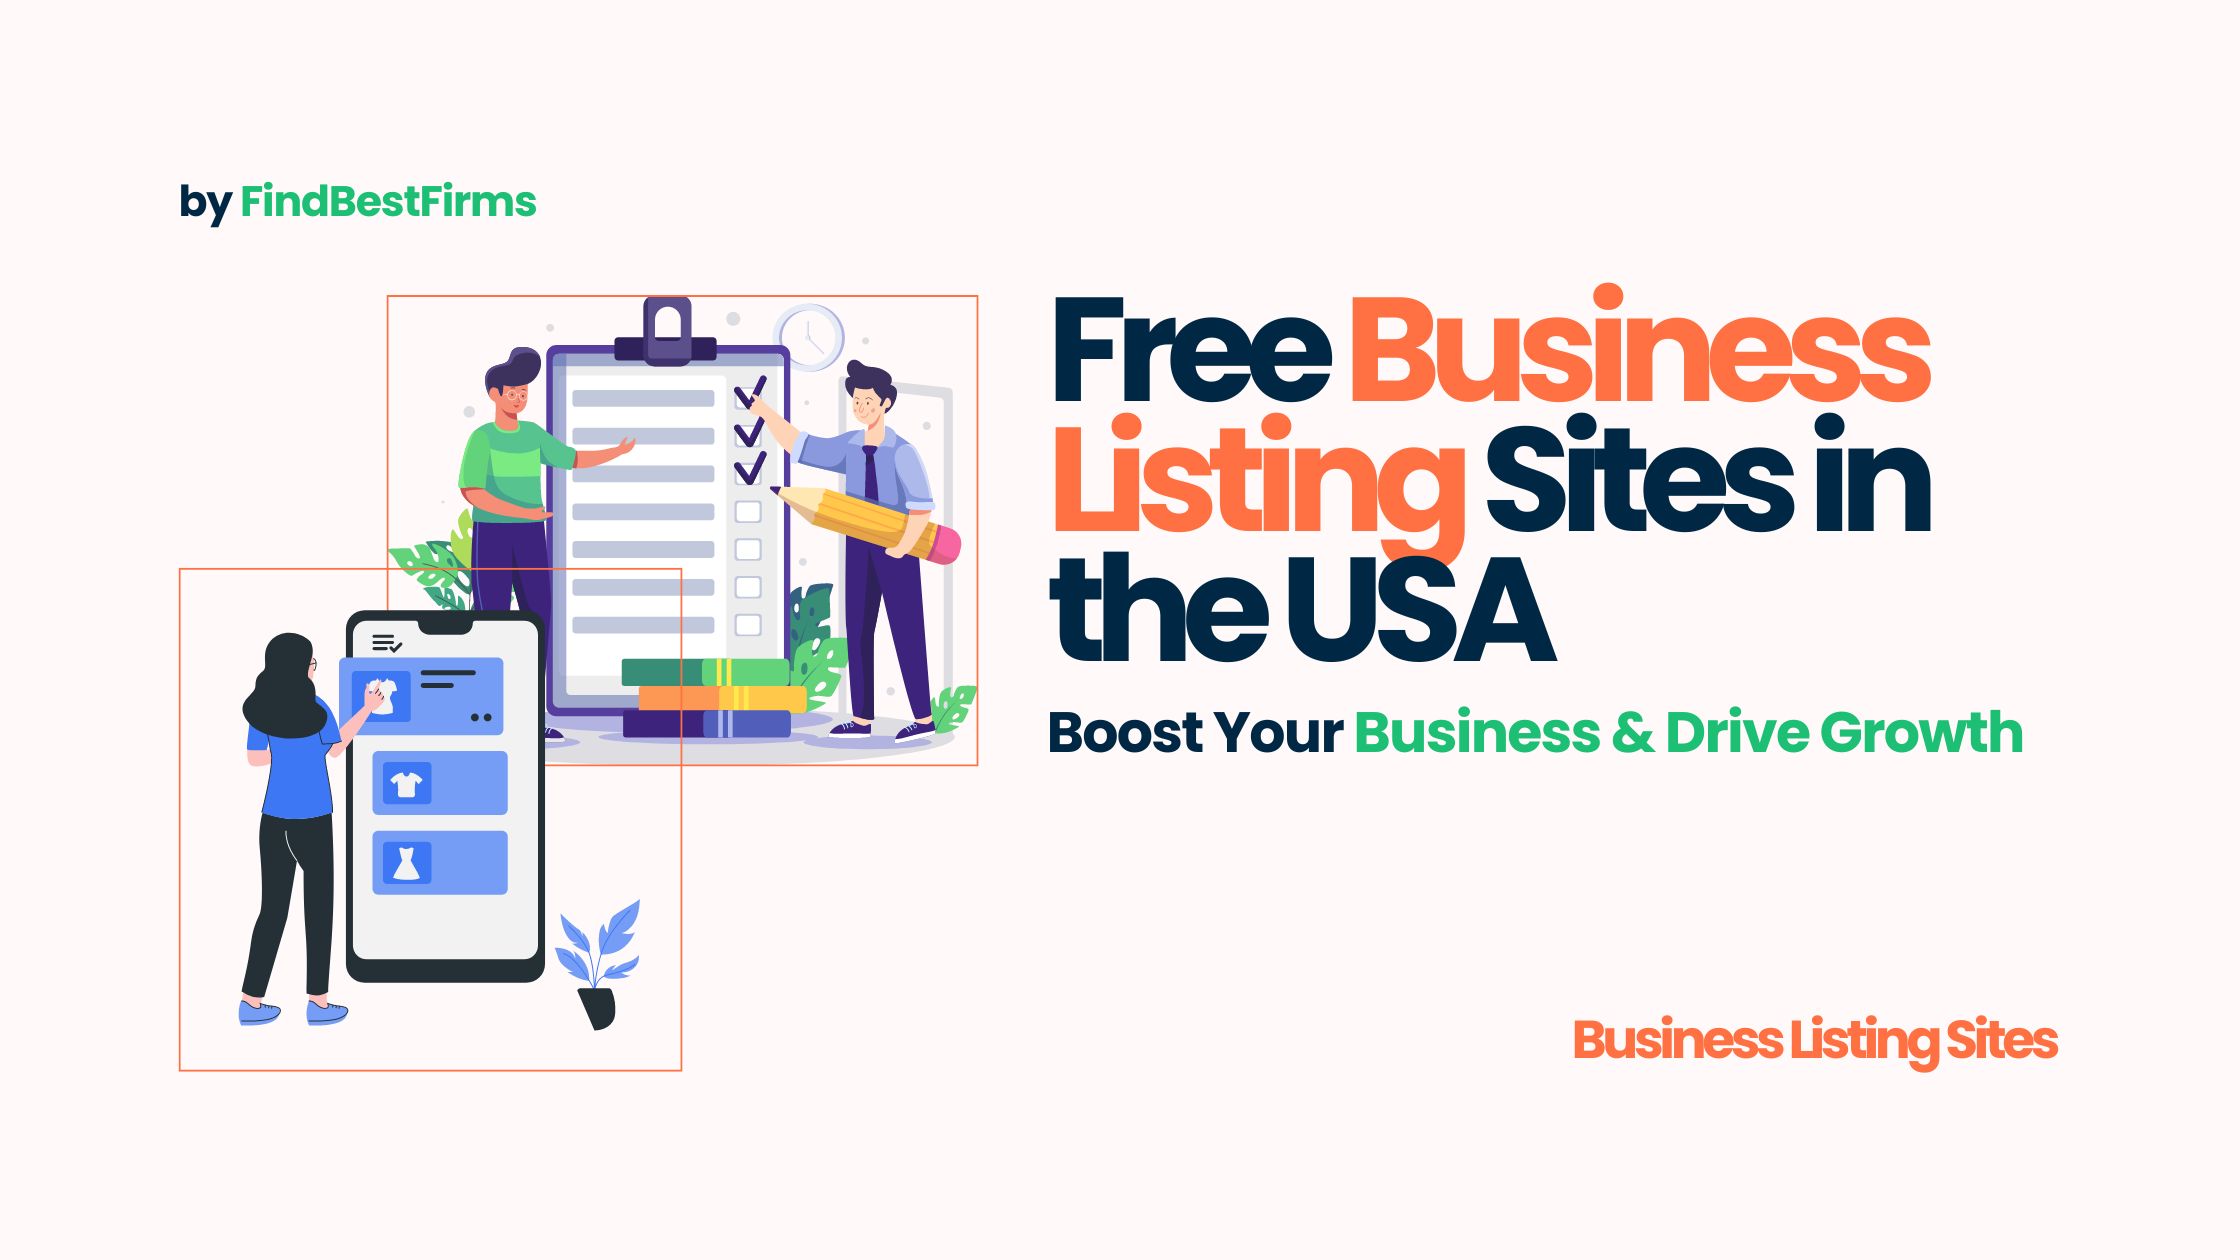 Free Business Listing Sites in the USA